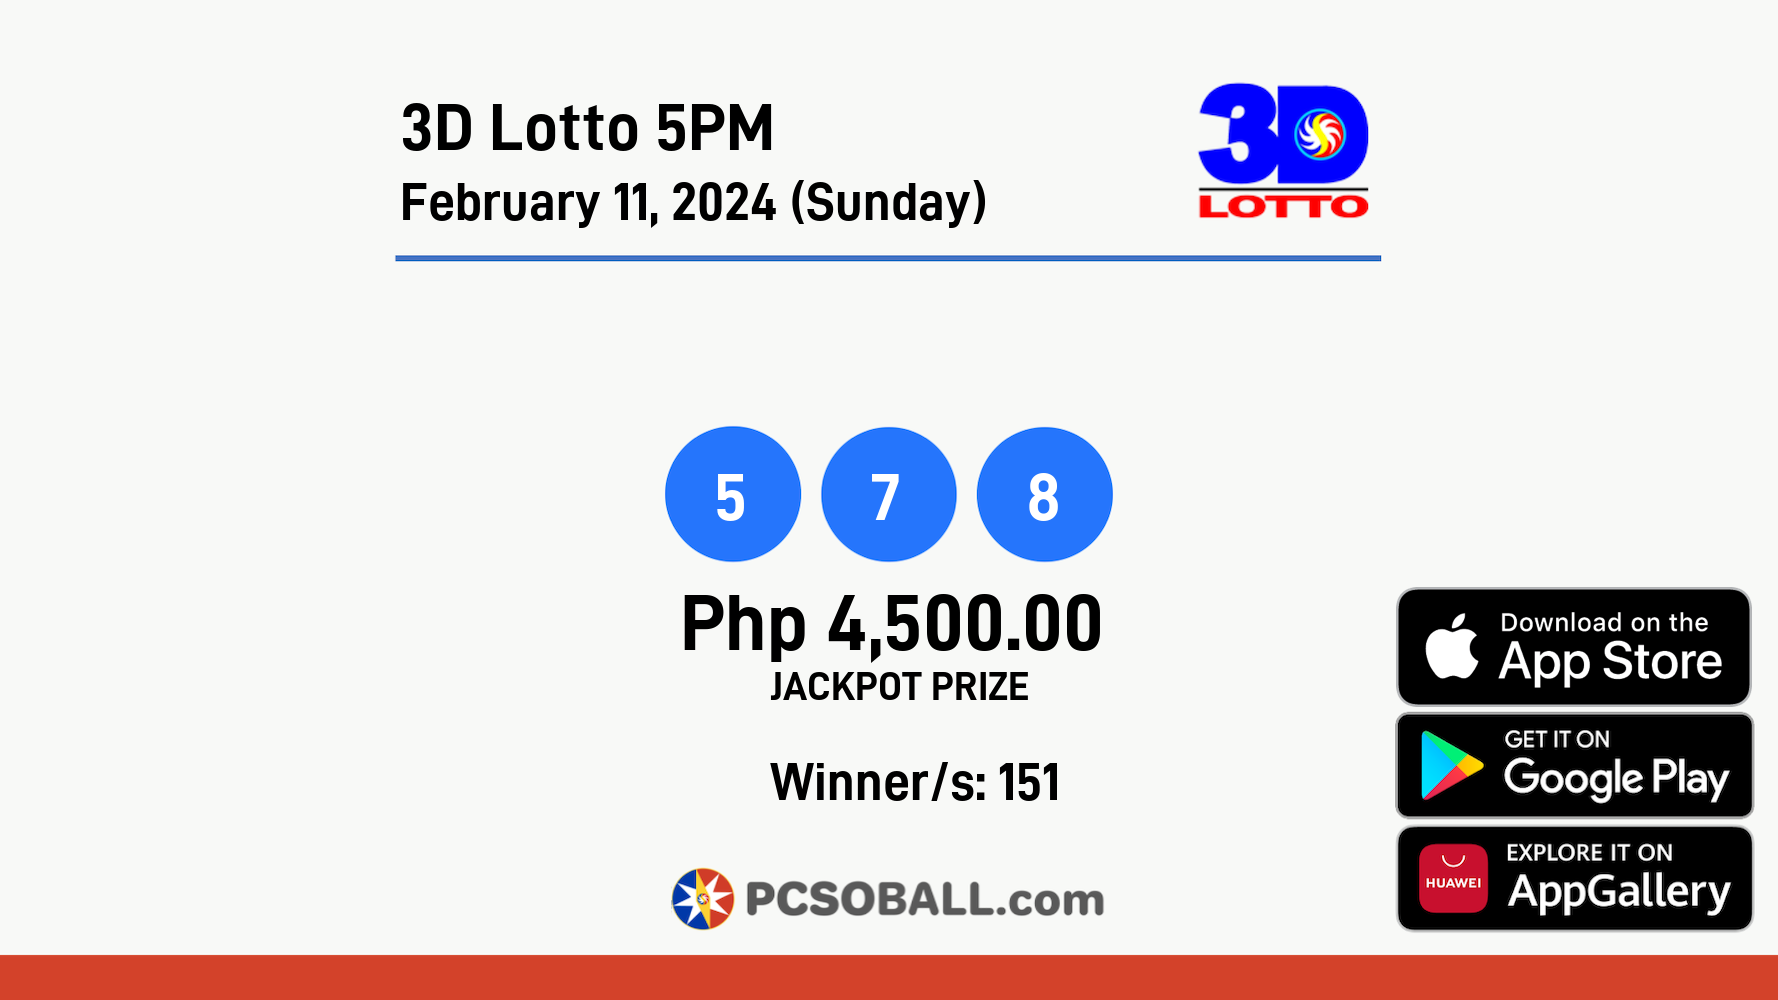 3D Lotto 5PM February 11, 2024 (Sunday) Result